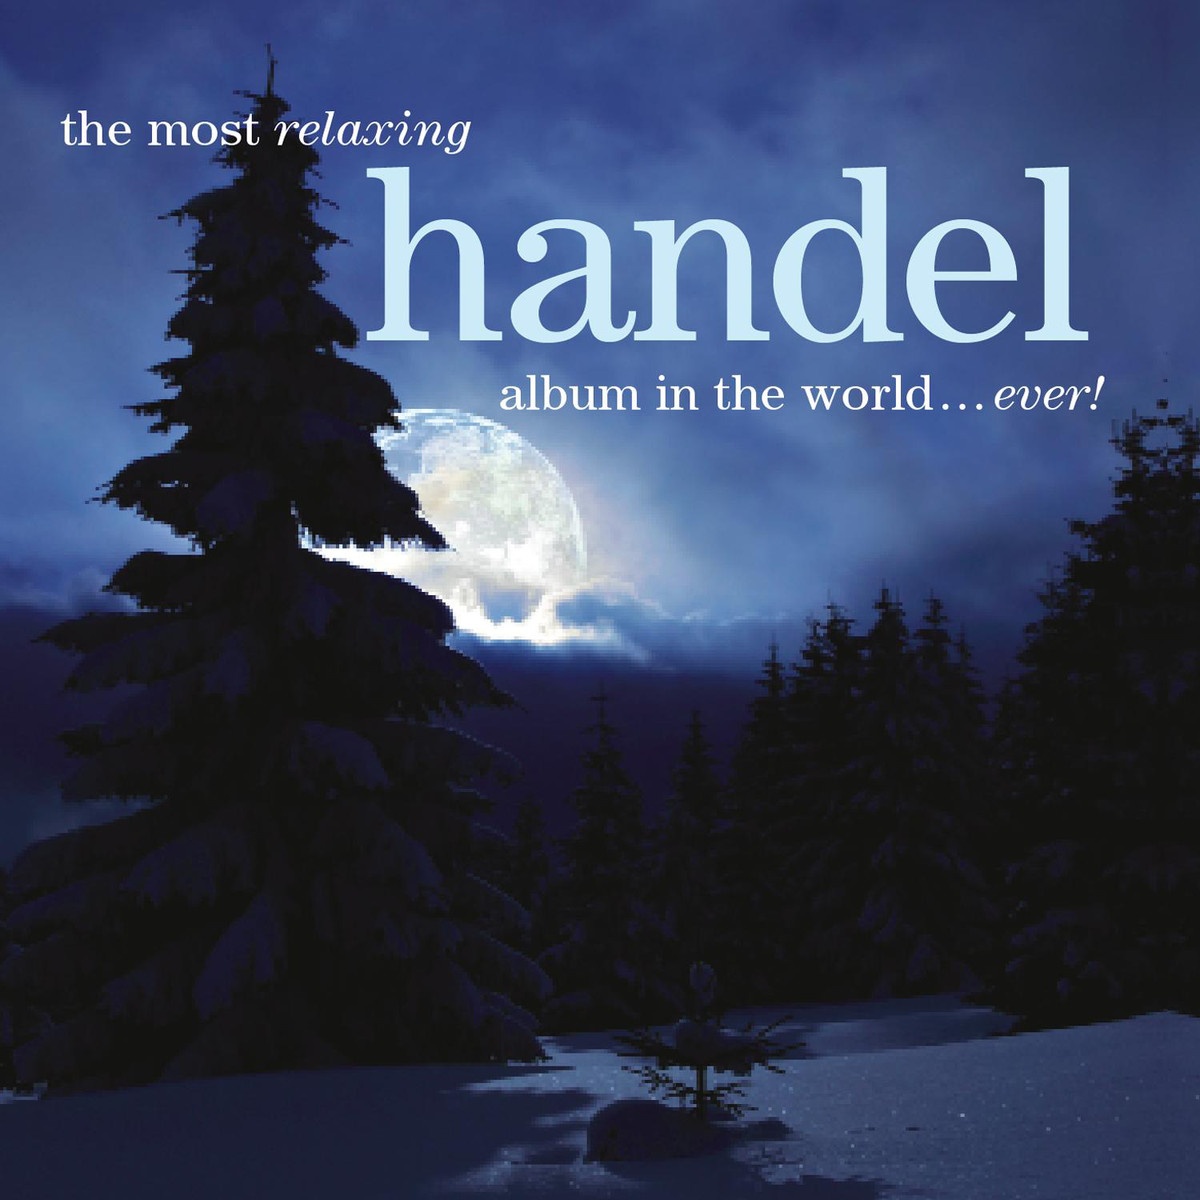 The Most Relaxing Handel Album in the World... Ever!